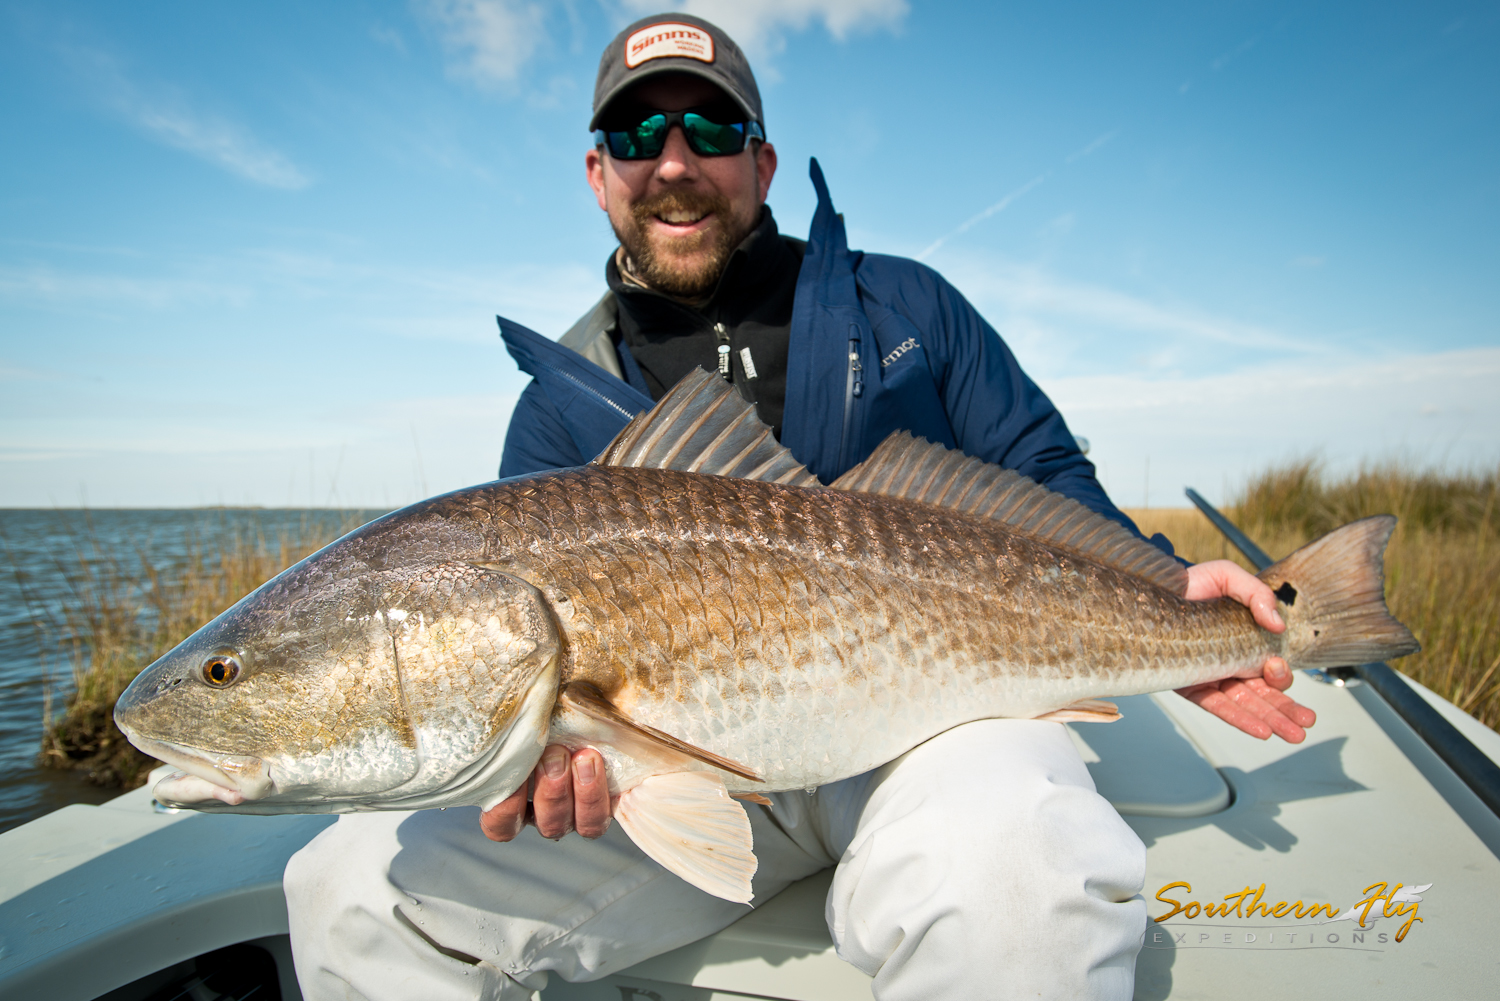 Fly Fishing in the Spring for redfish with southern fly expeditions of New Orleans Louisiana  